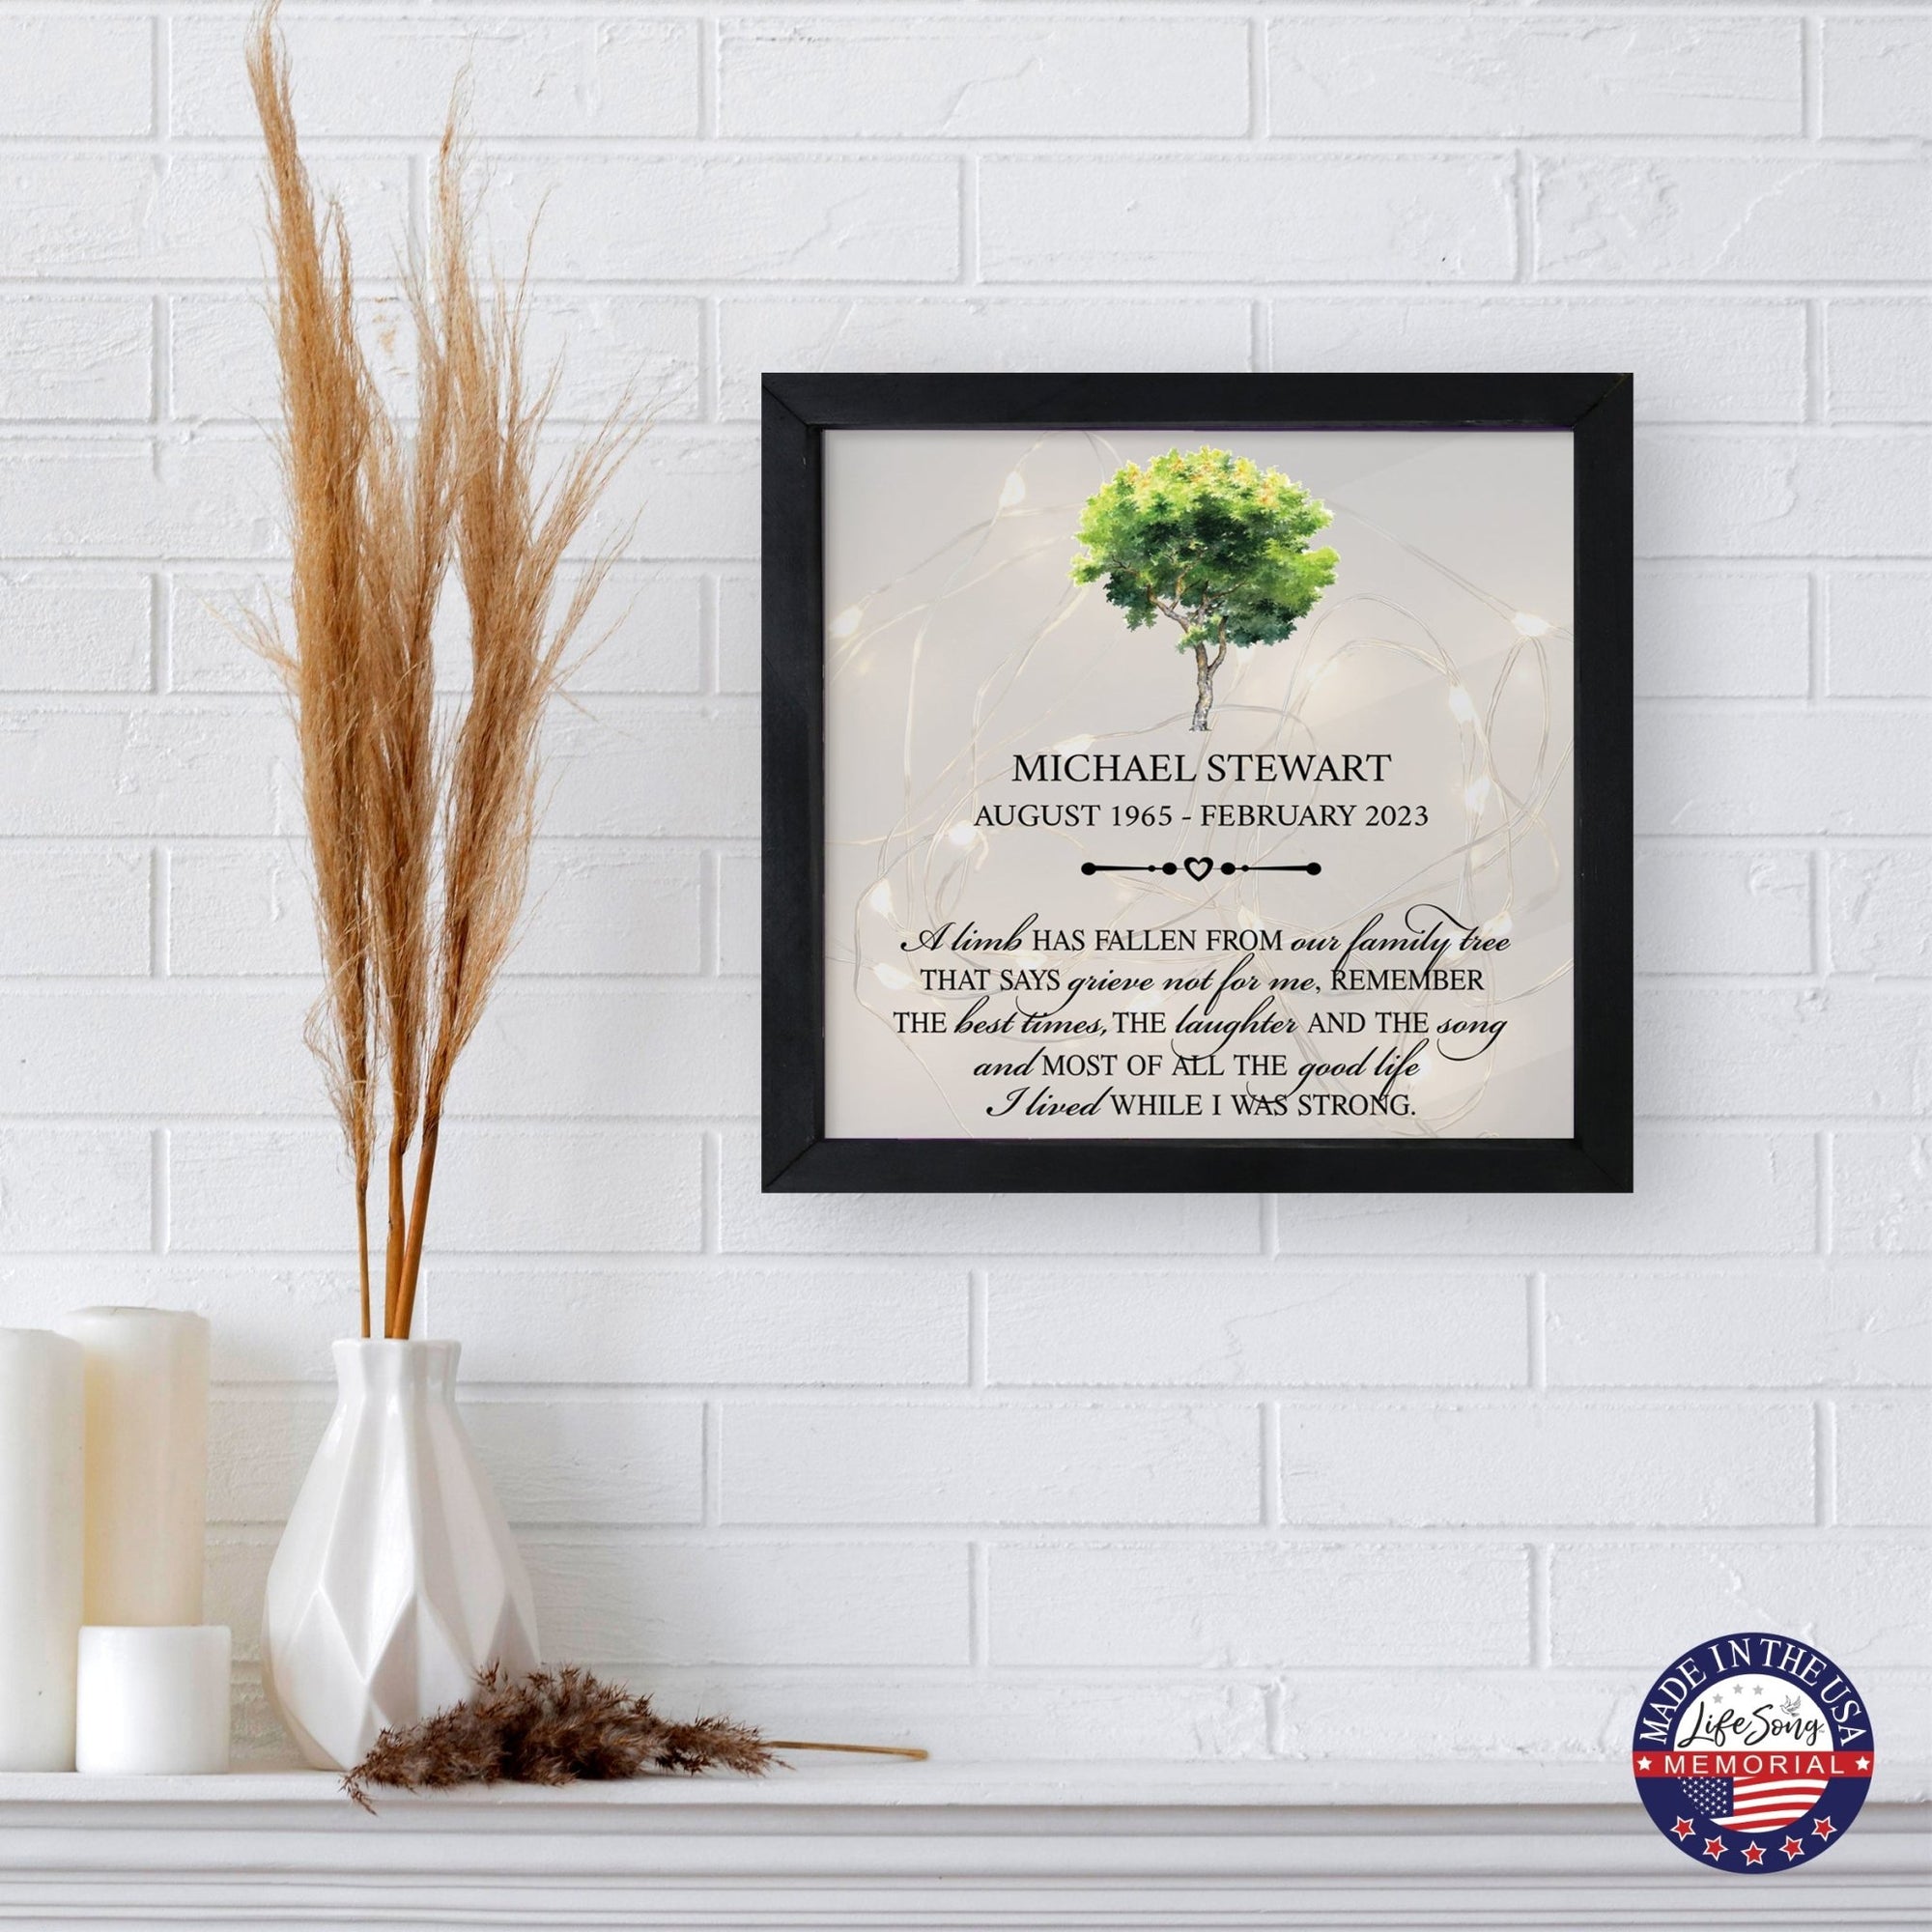 Personalized Memorial Black Framed Shadow Box With Lights Sympathy Gift Wall Décor - A Limb Has Fallen - LifeSong Milestones